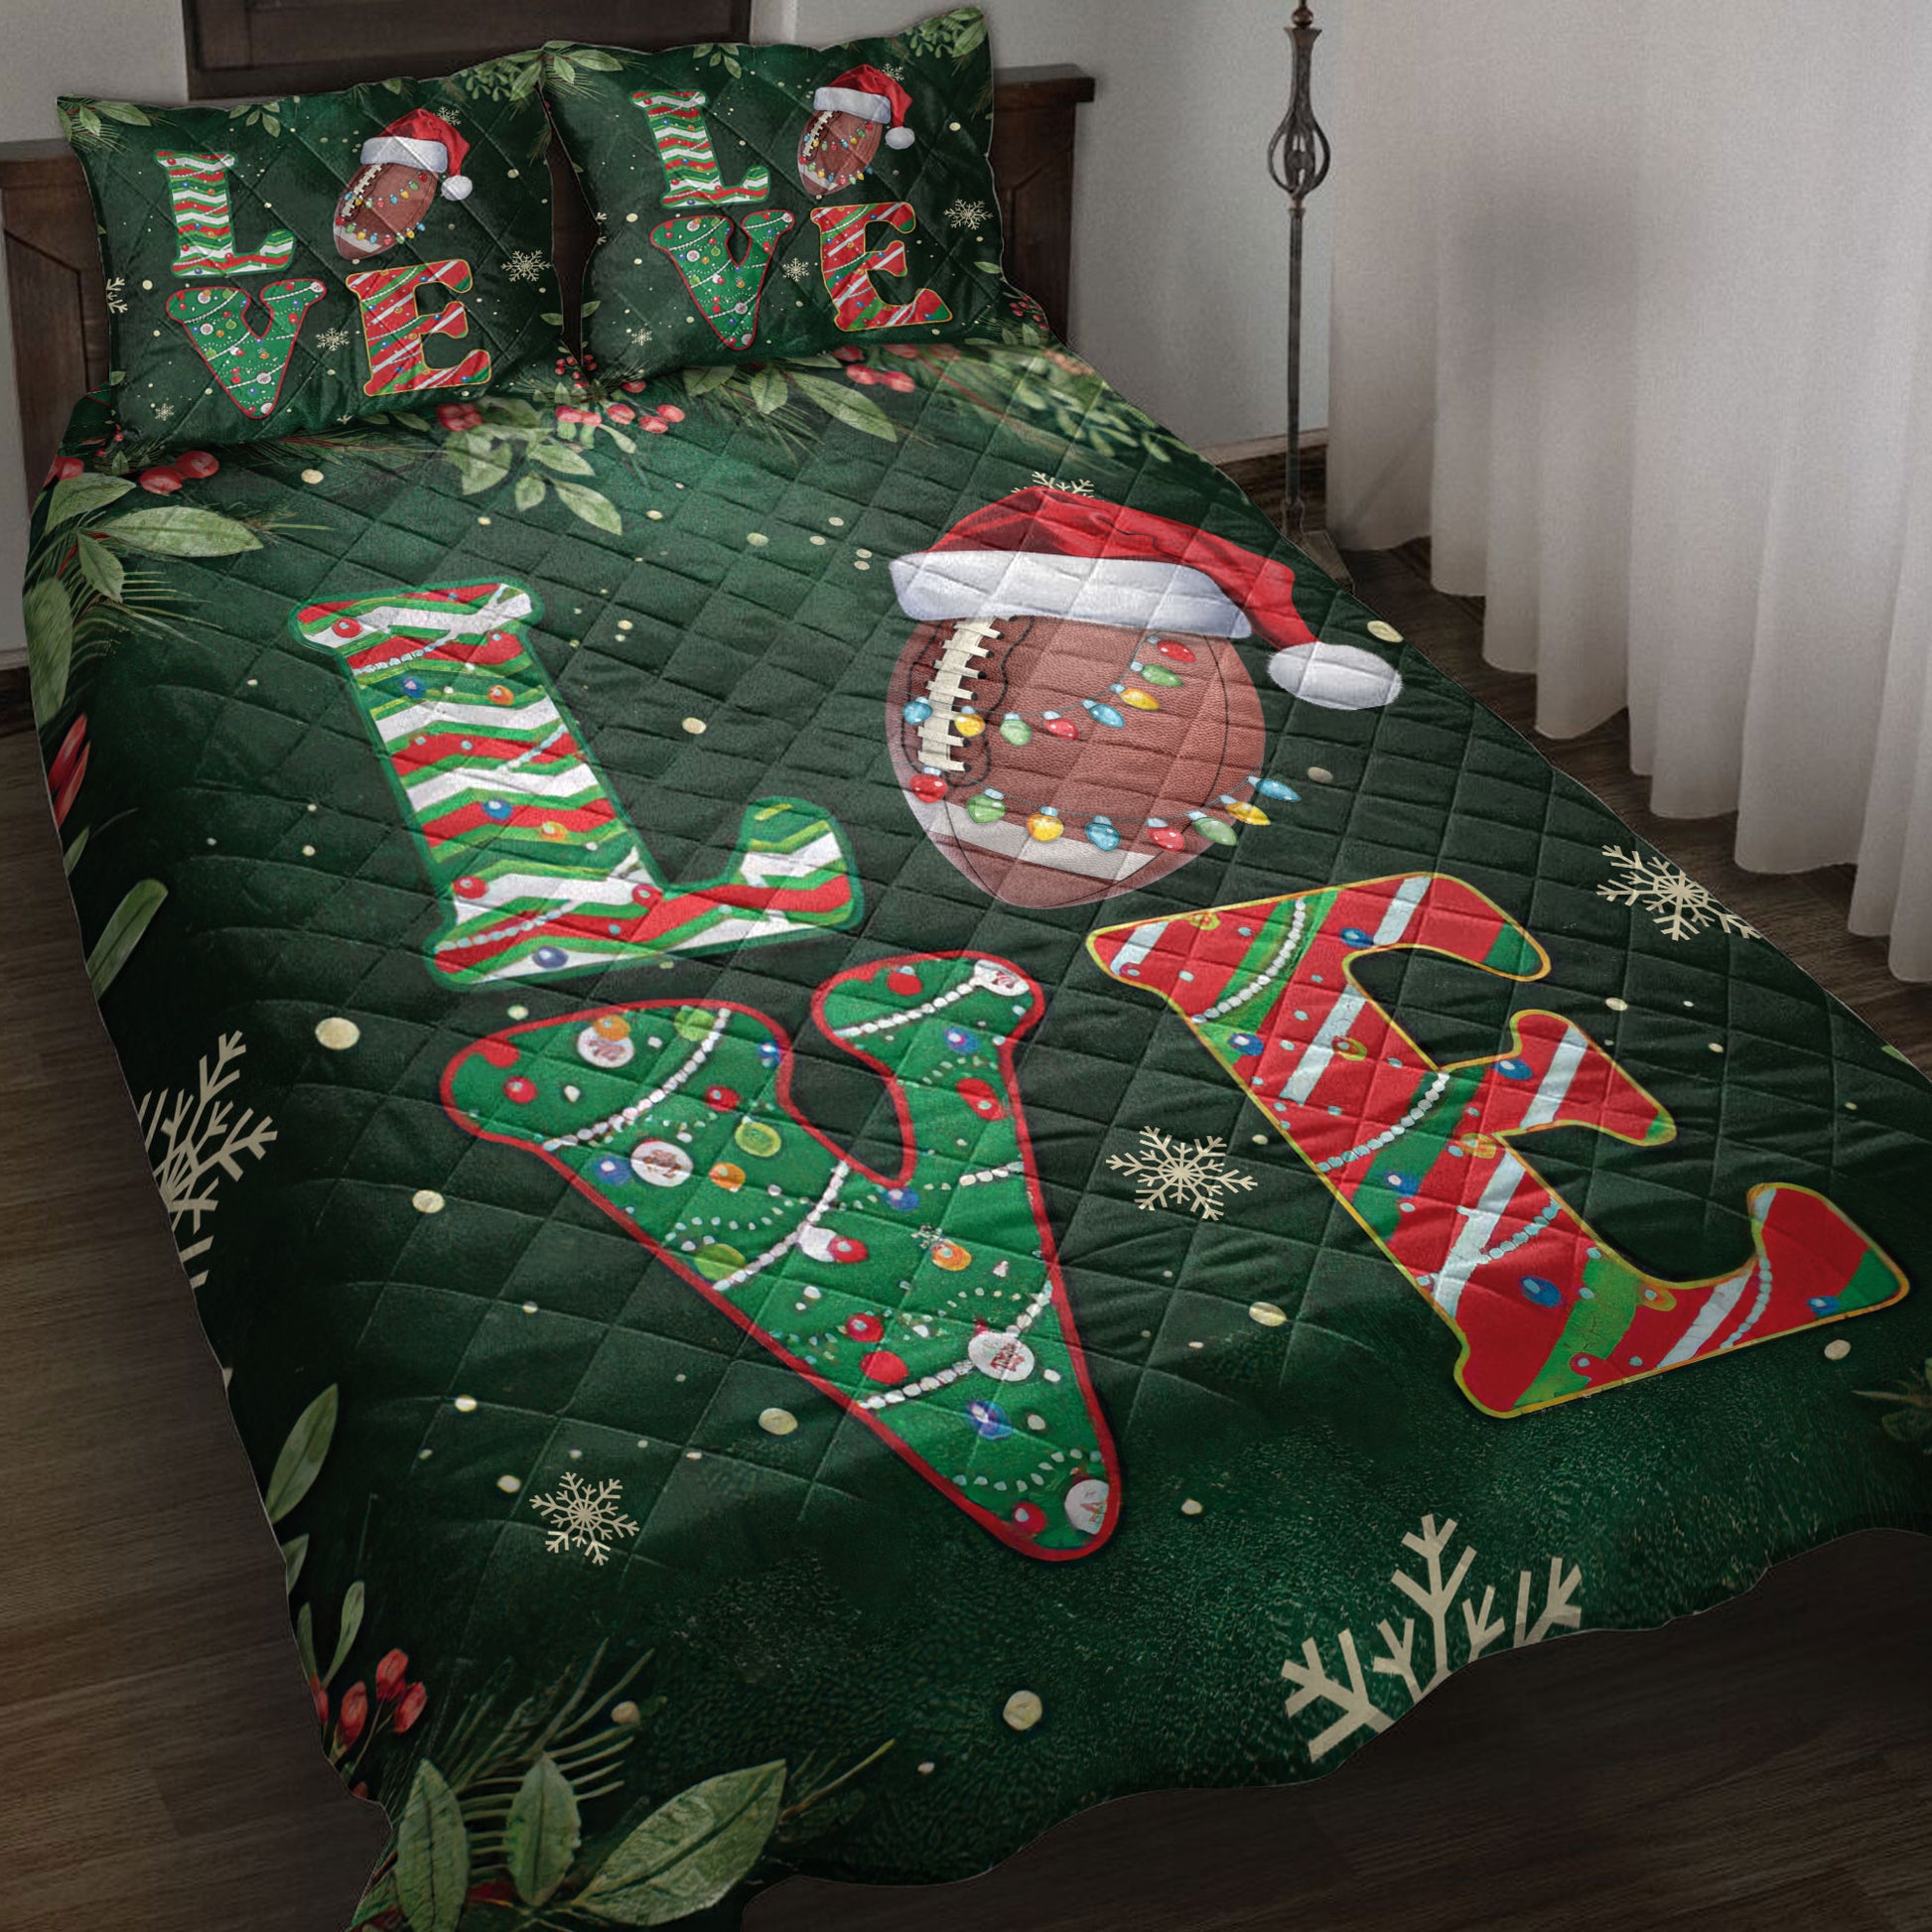 Ohaprints-Quilt-Bed-Set-Pillowcase-Love-Football-With-Christmas-Hat-Holly-Berry--Snowflake-Xmas-Holiday-Blanket-Bedspread-Bedding-3768-Throw (55'' x 60'')